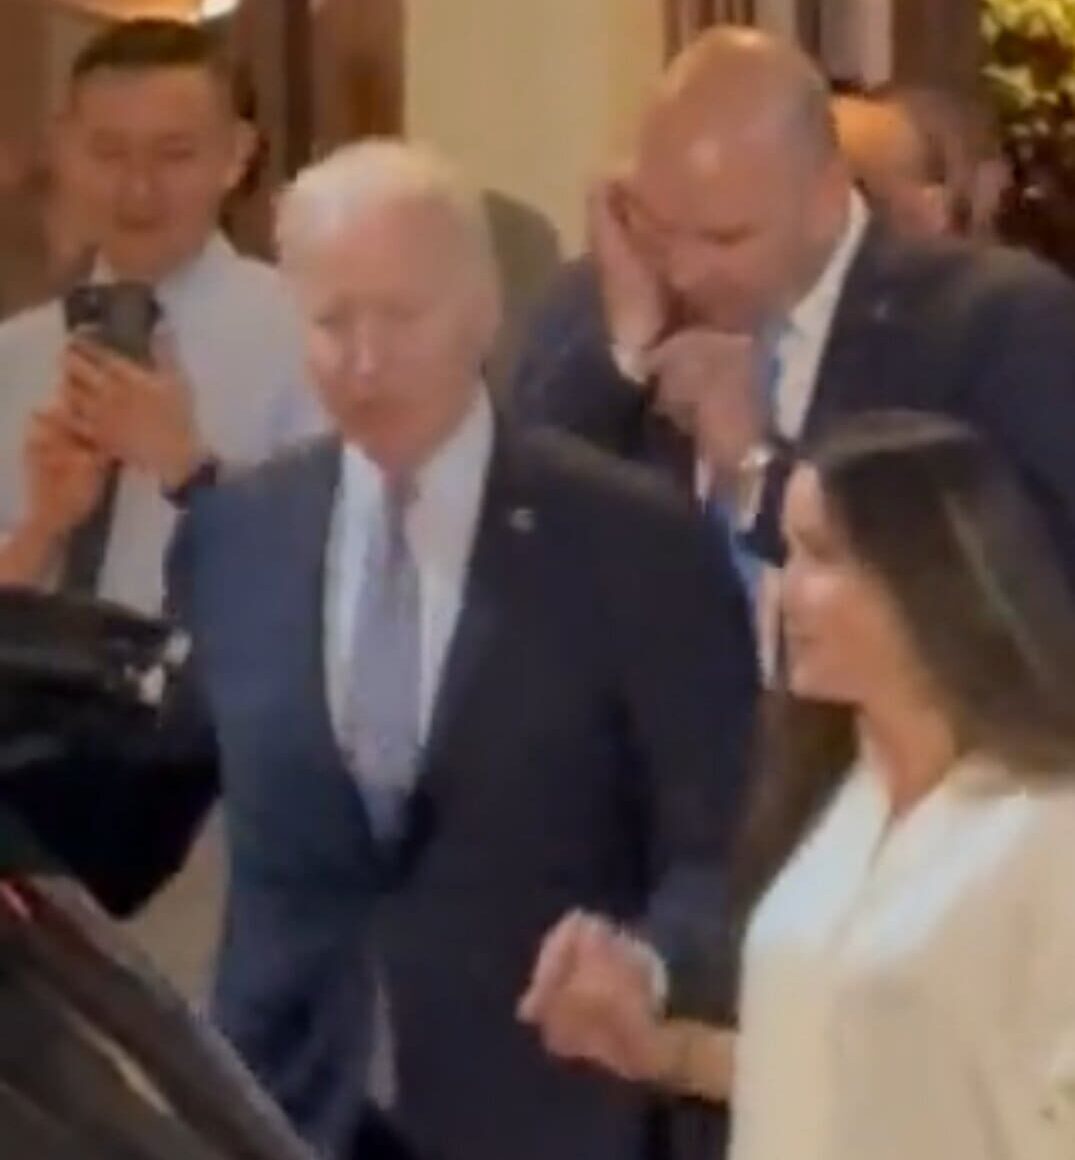 Joe Biden Appears to Need Help With Stairs From Daughter Ashley at New York City Restaurant